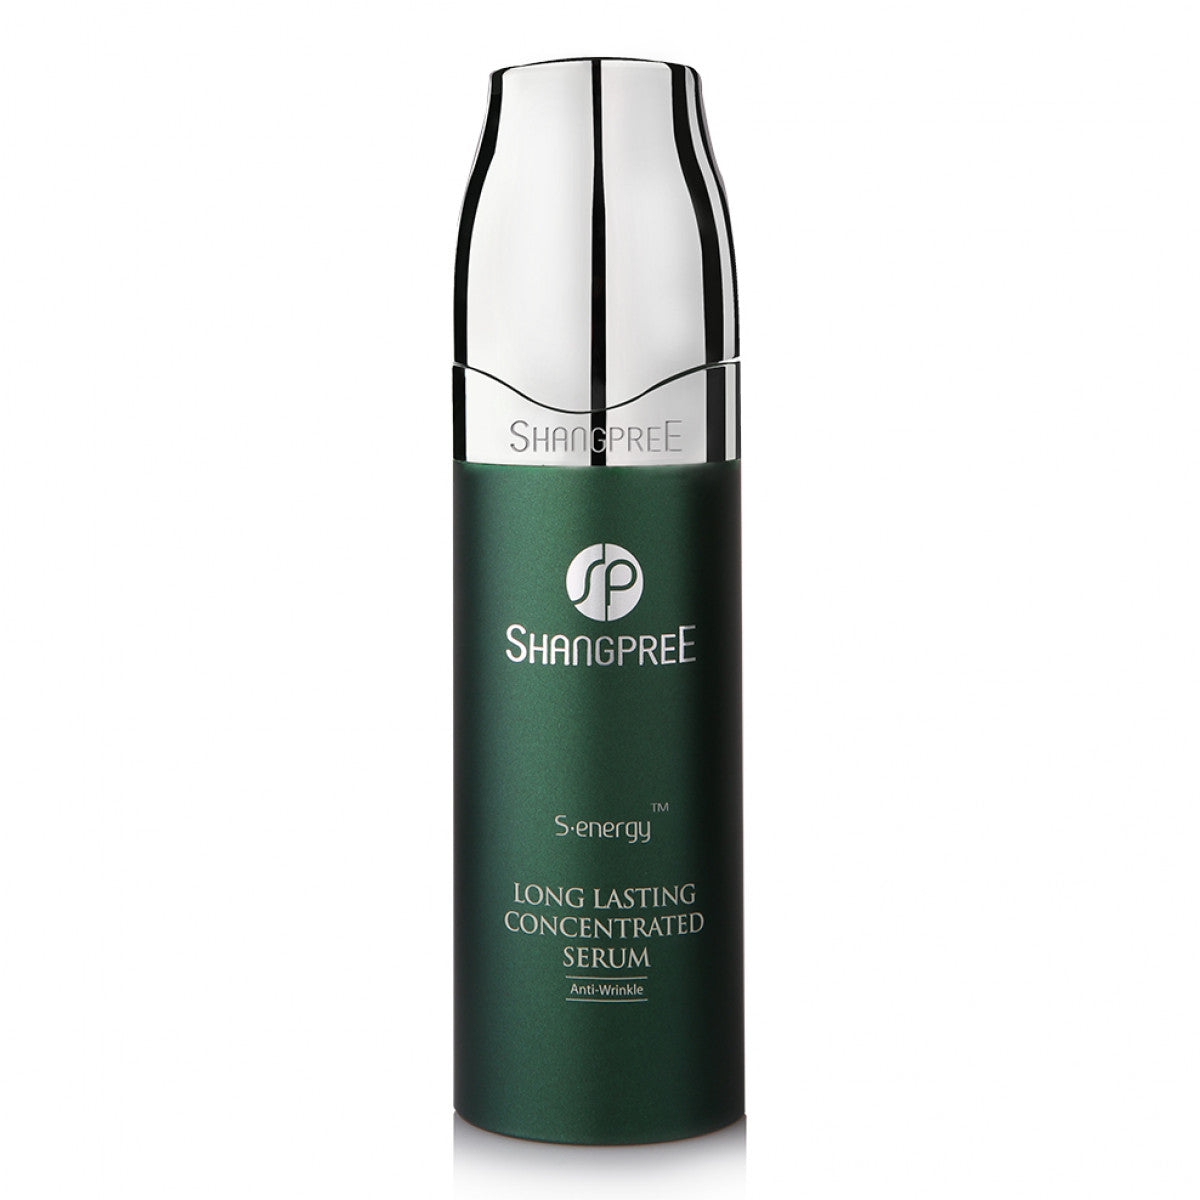 SHANGPREE S-ENERGY LONG LASTING CONCENTRATED SERUM 30 ML.